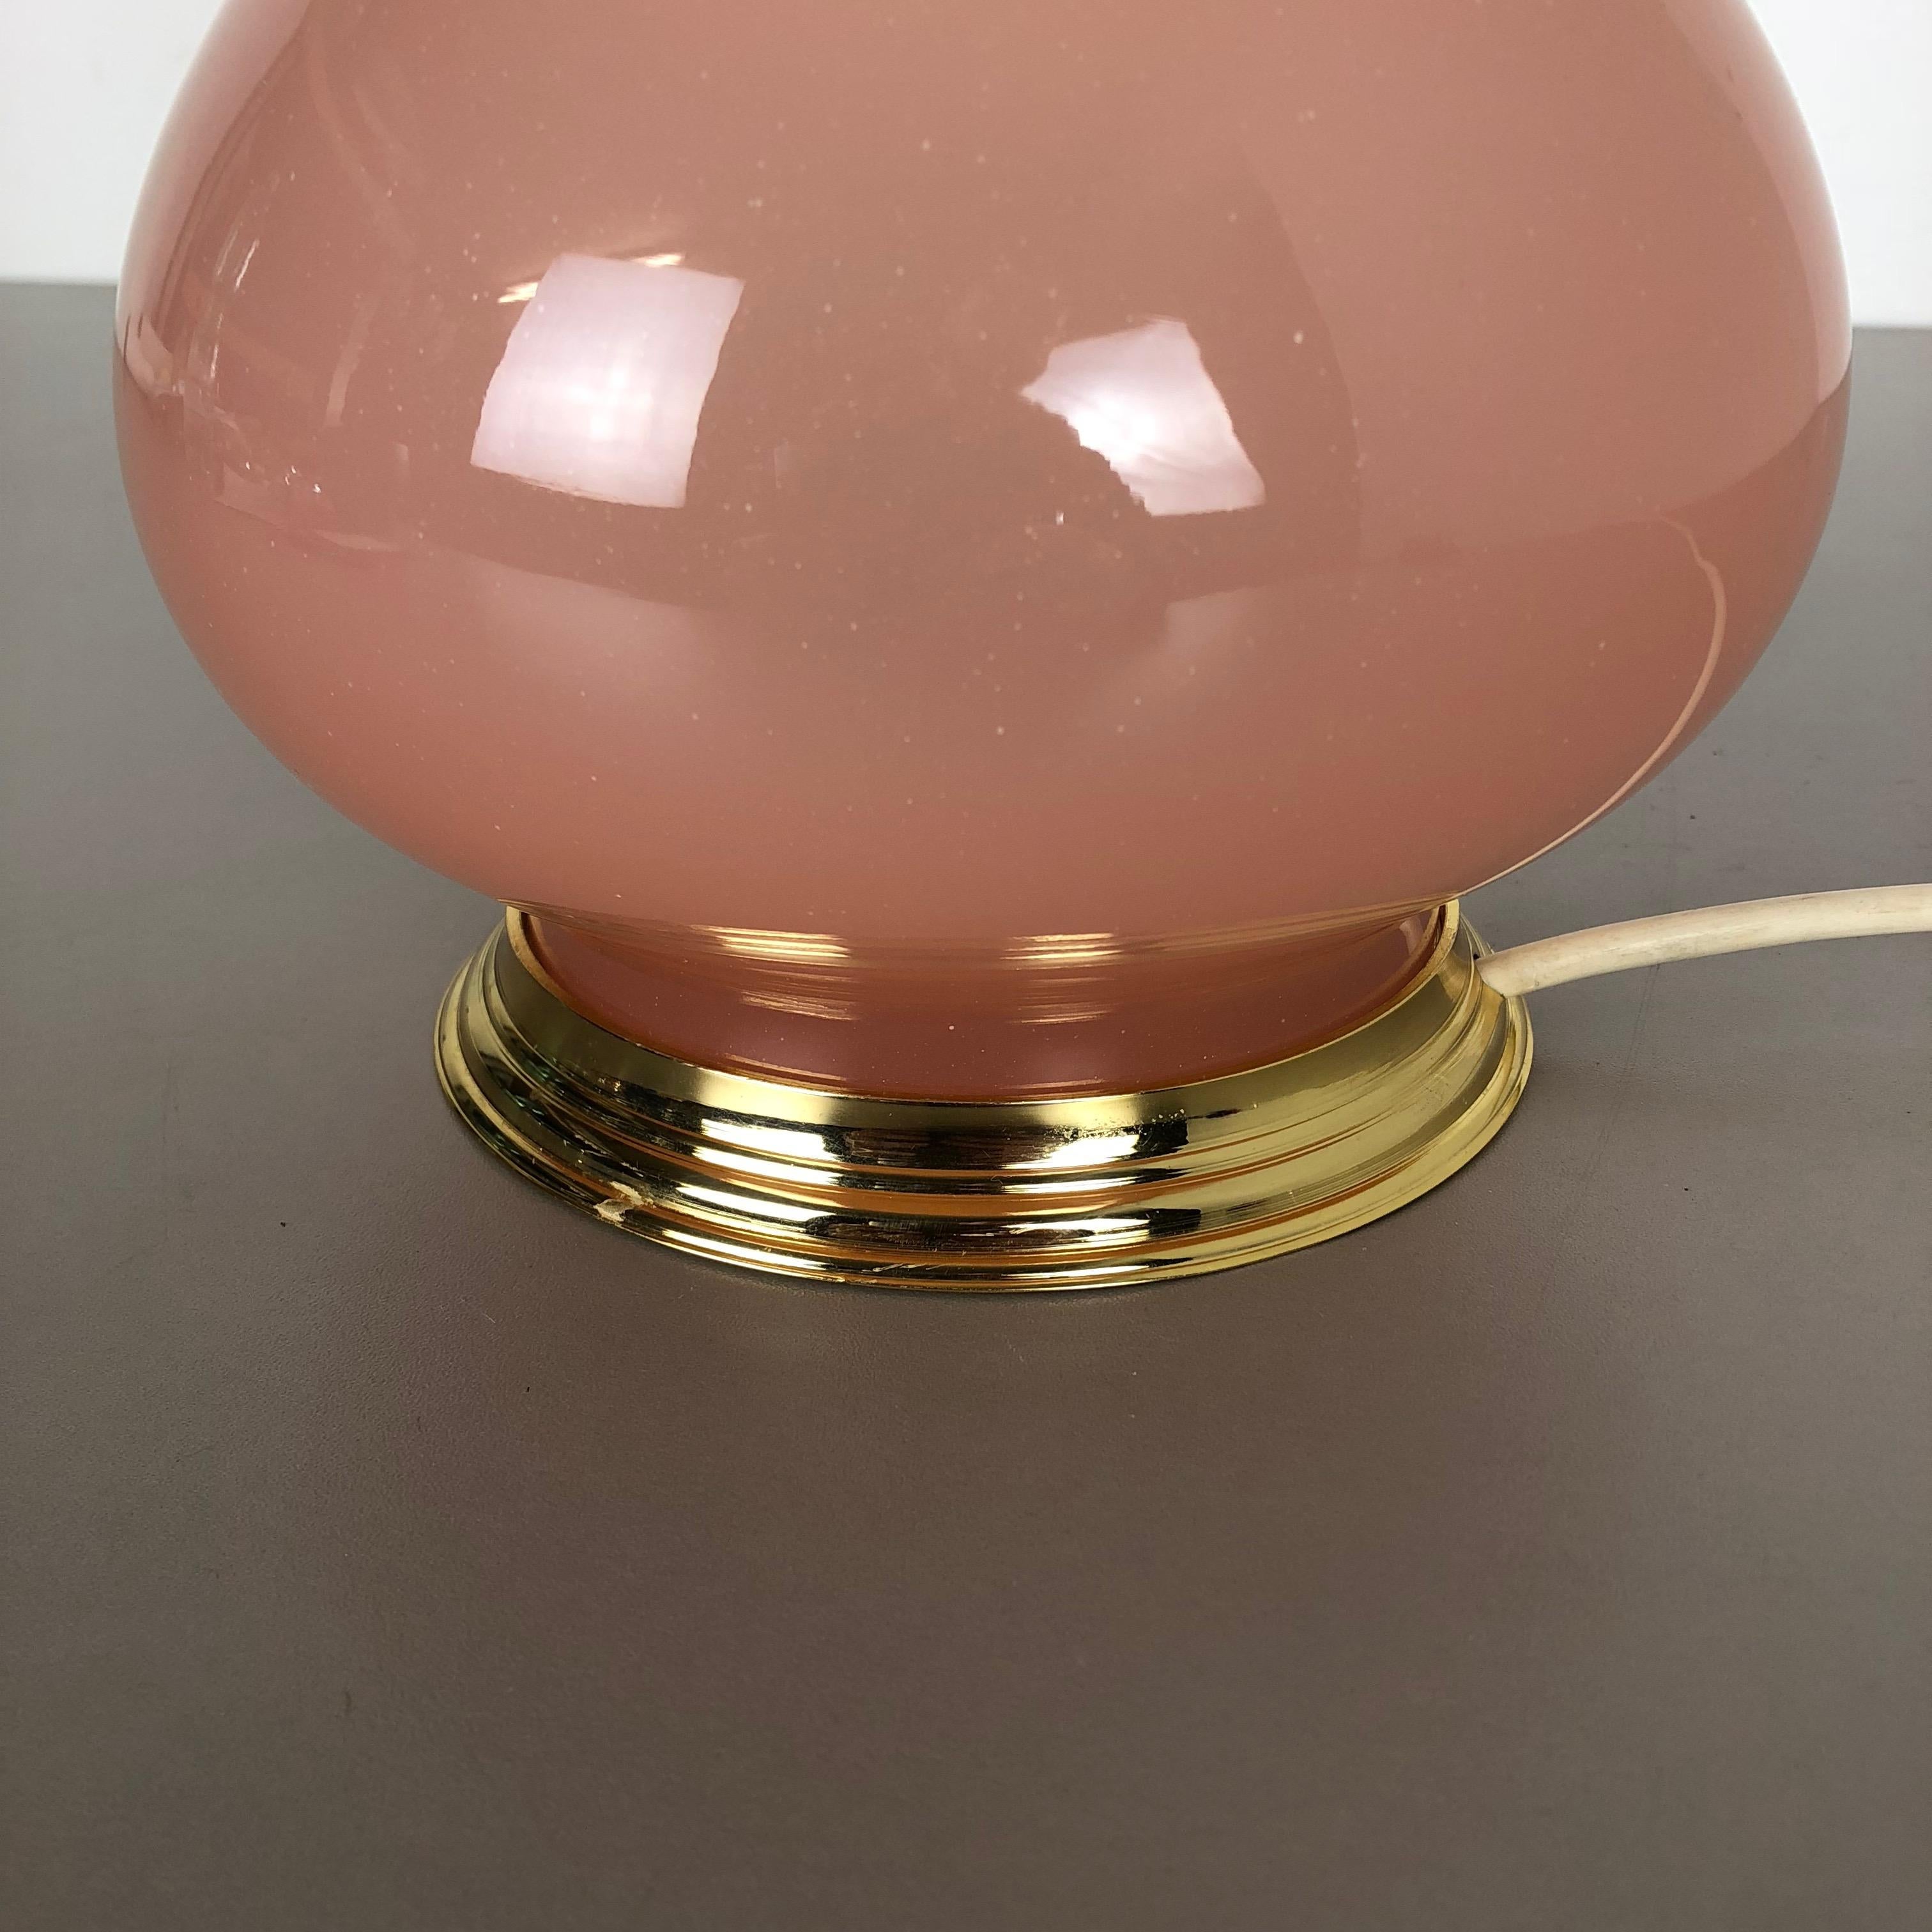 New Old Stock Opaline Murano Glass Table Light by Cenedese Vetri, Italy, 1960 For Sale 6